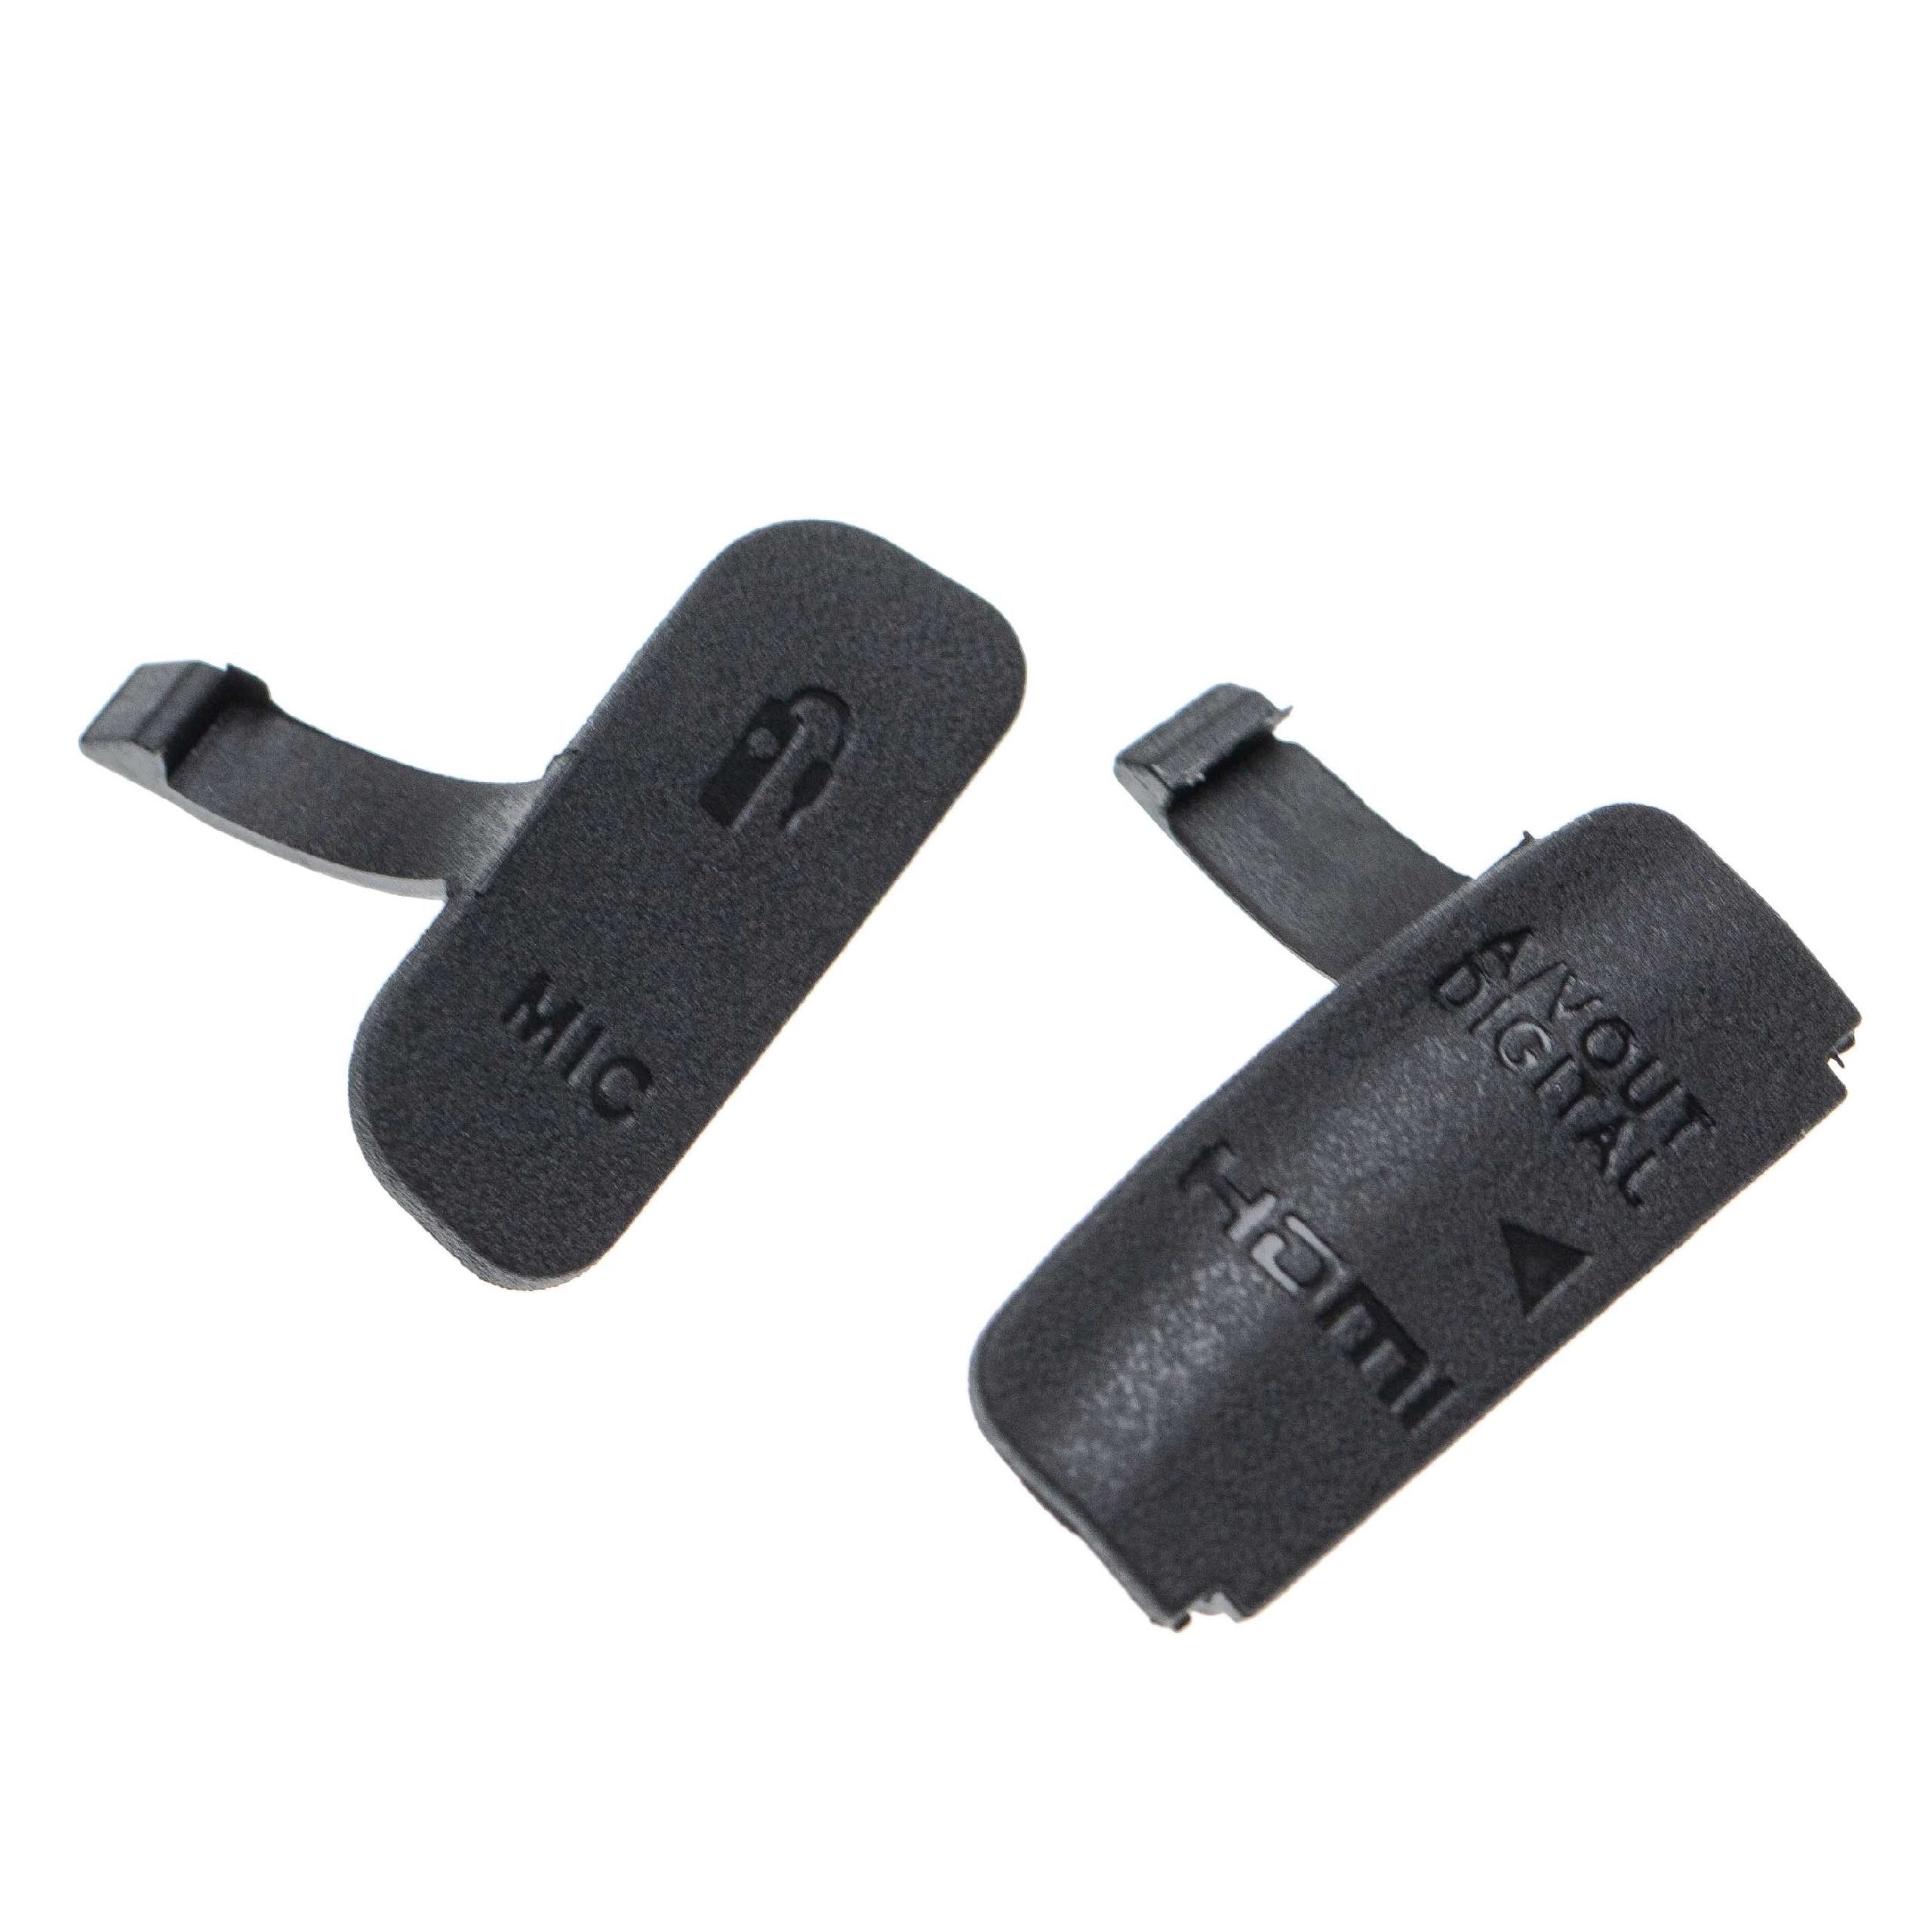 2x Terminal Covers suitable for Canon EOS 600D Camera Contacts - Rubber, Black